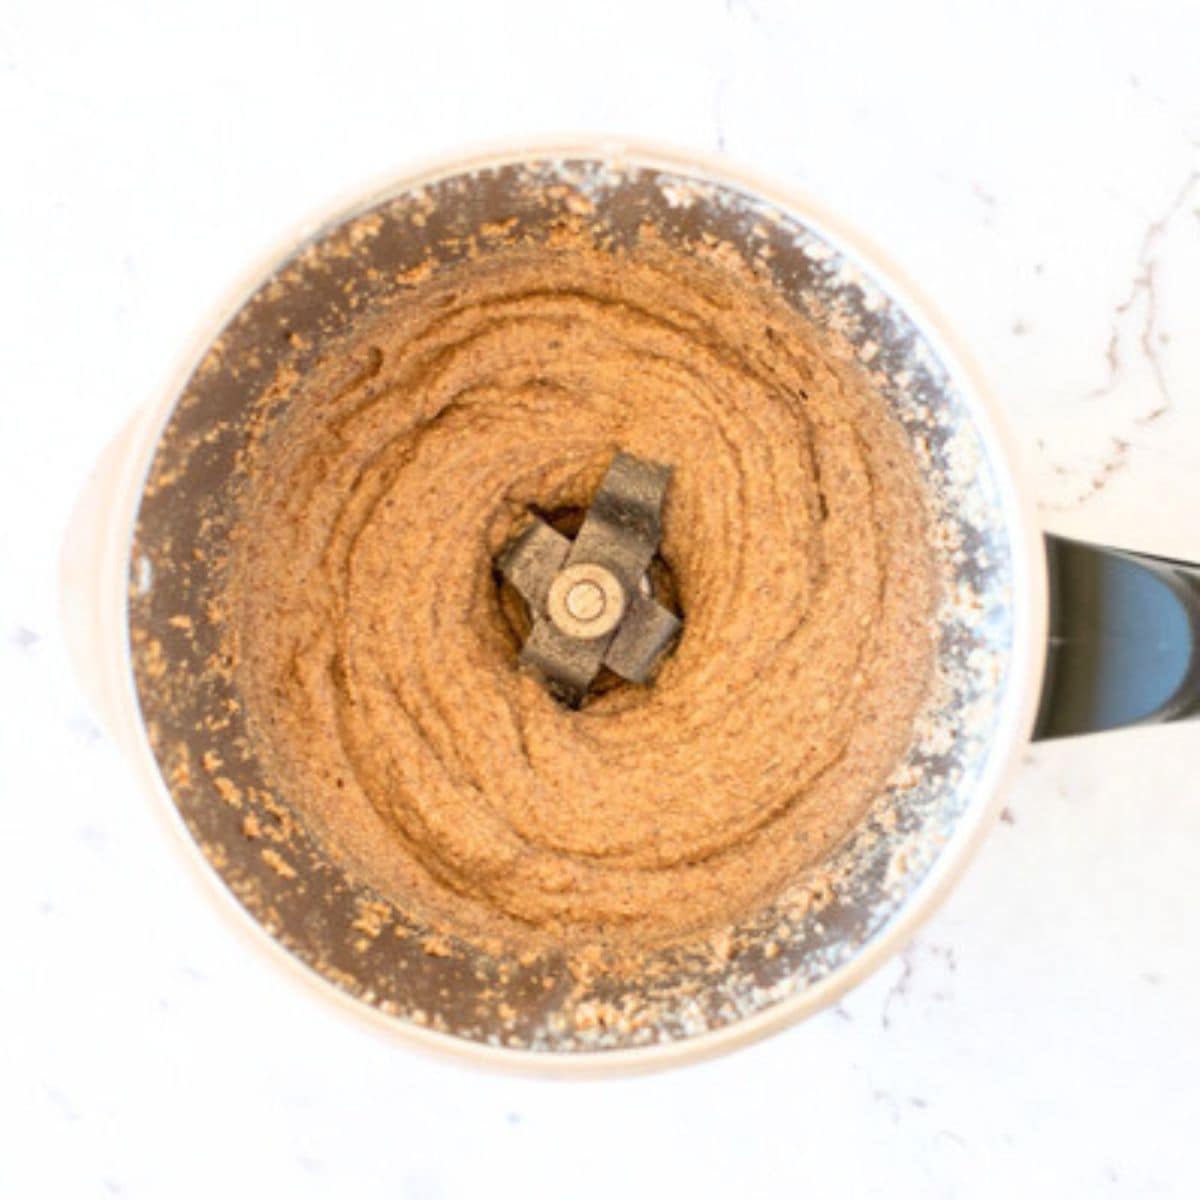 Almond butter in a Thermomix bowl.